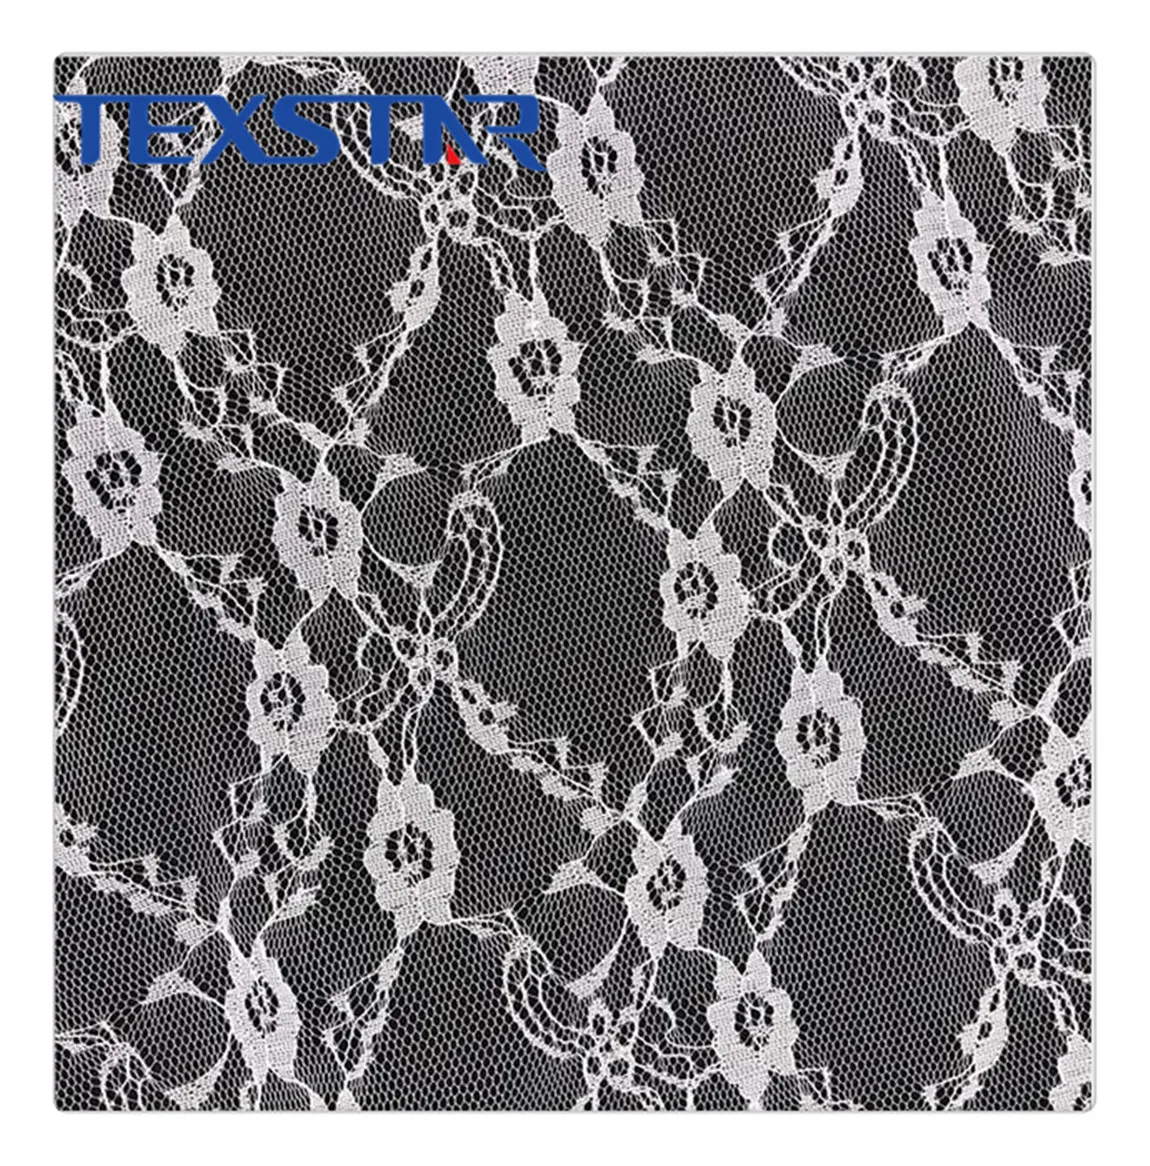 100 Poly Raschel Knit African Swiss Lace Fabric Manufacture Buy Bridal Lace Fabric Rasche Lace Fabric Floral Lace Fabric Product On Alibaba Com